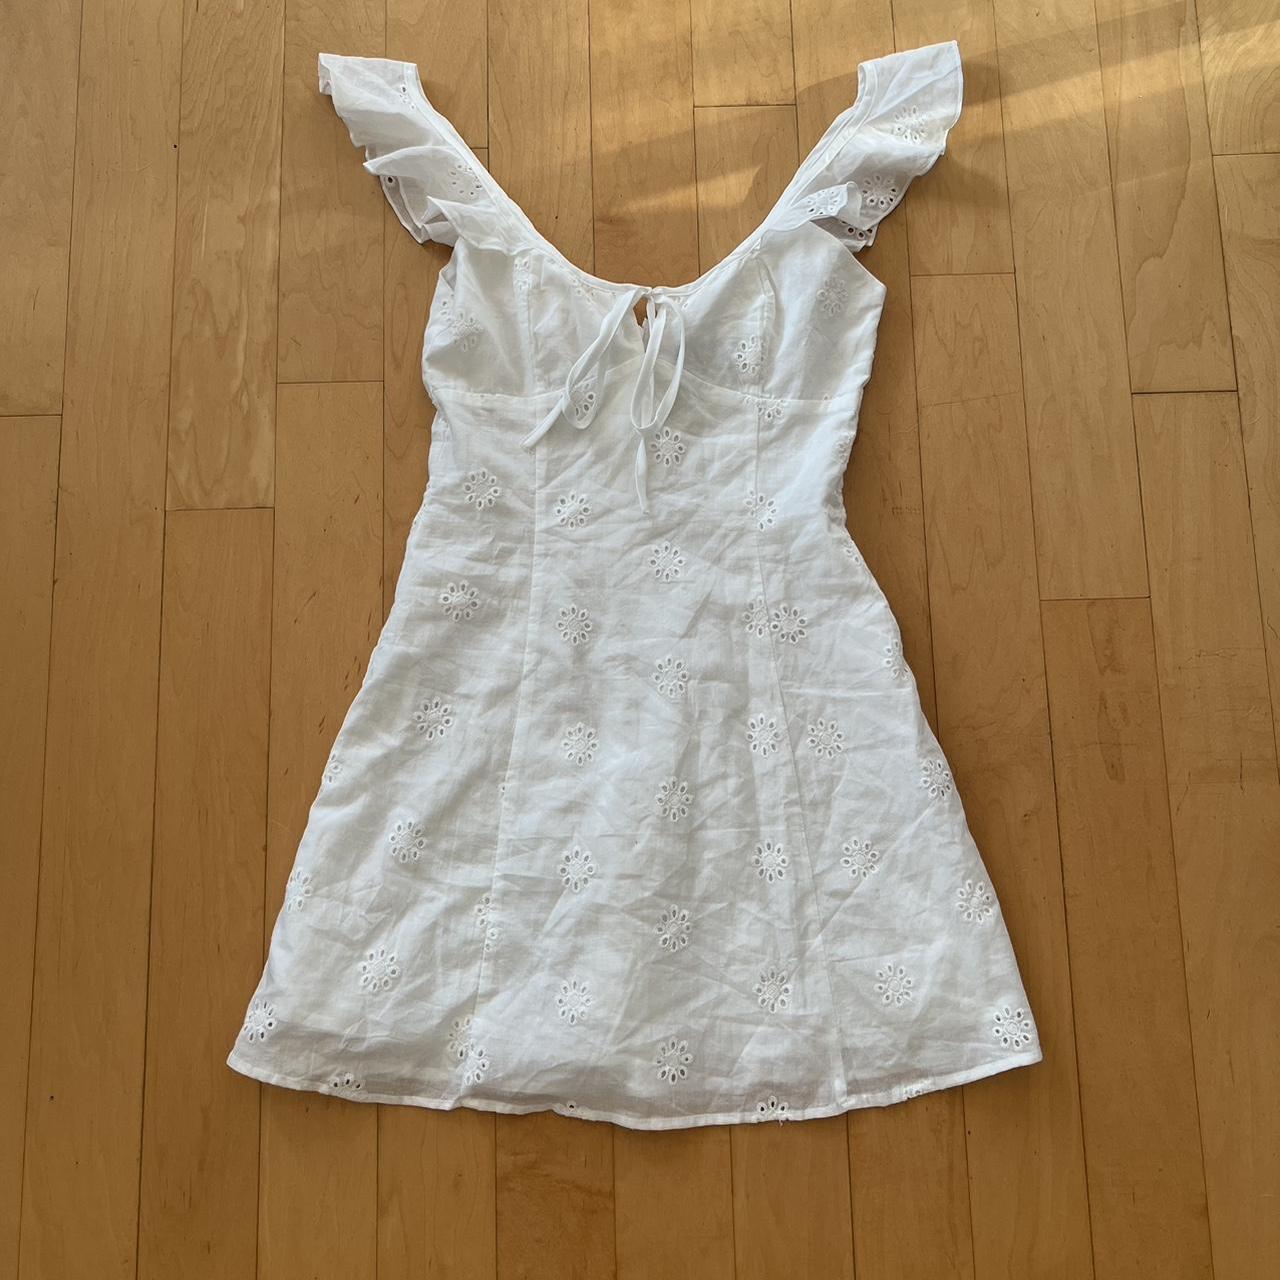 Princess Polly besiana dress in white SIZE SOLD... - Depop